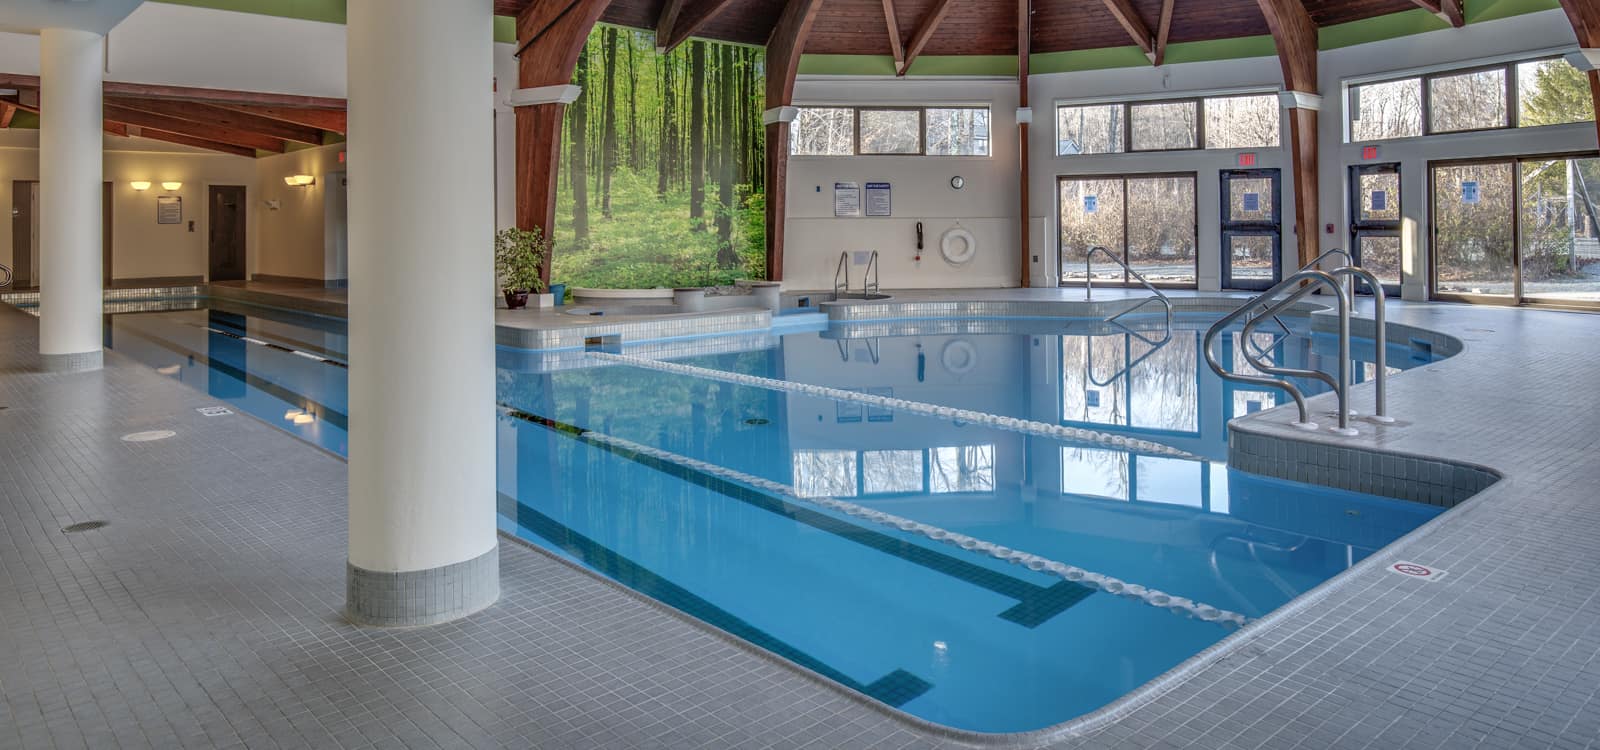 Spa at The Woods - Indoor Pool